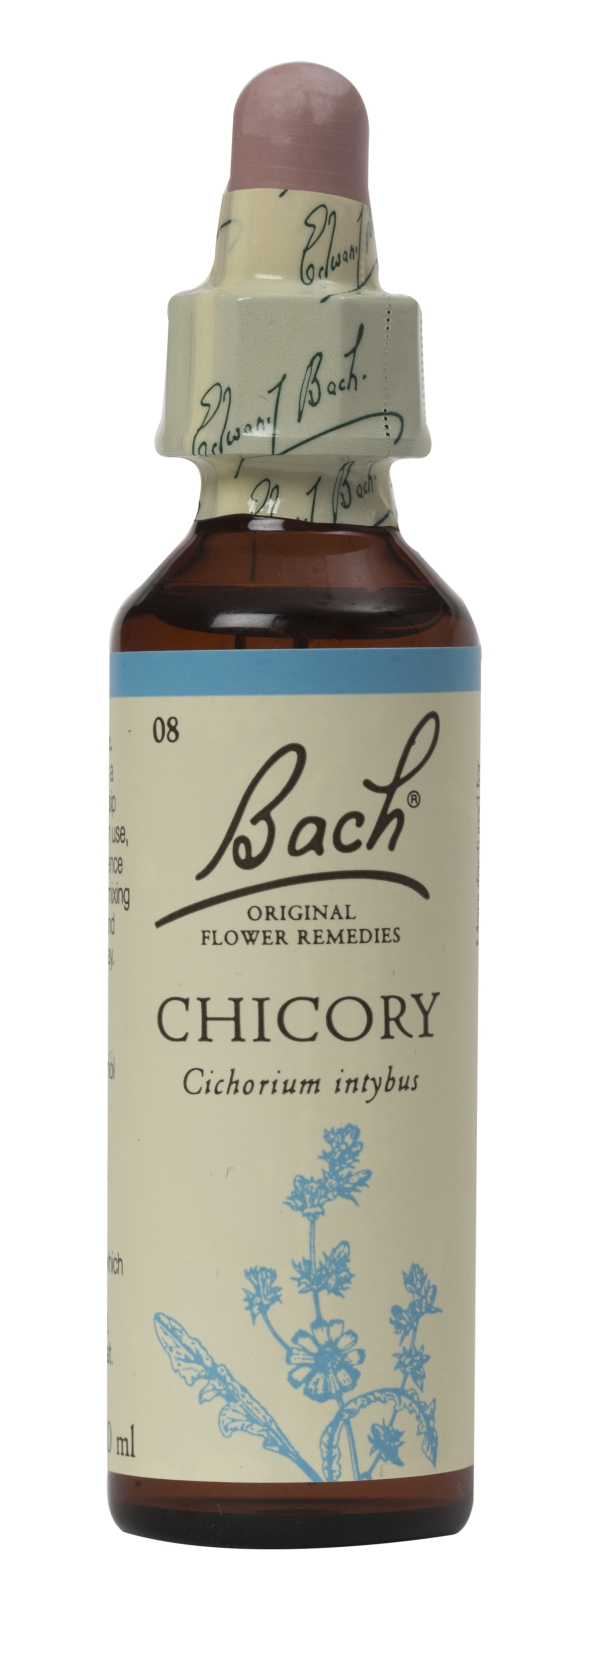 Nelson Bach Flower Remedies: Bach Chicory Flower Remedy (20ml) available online here